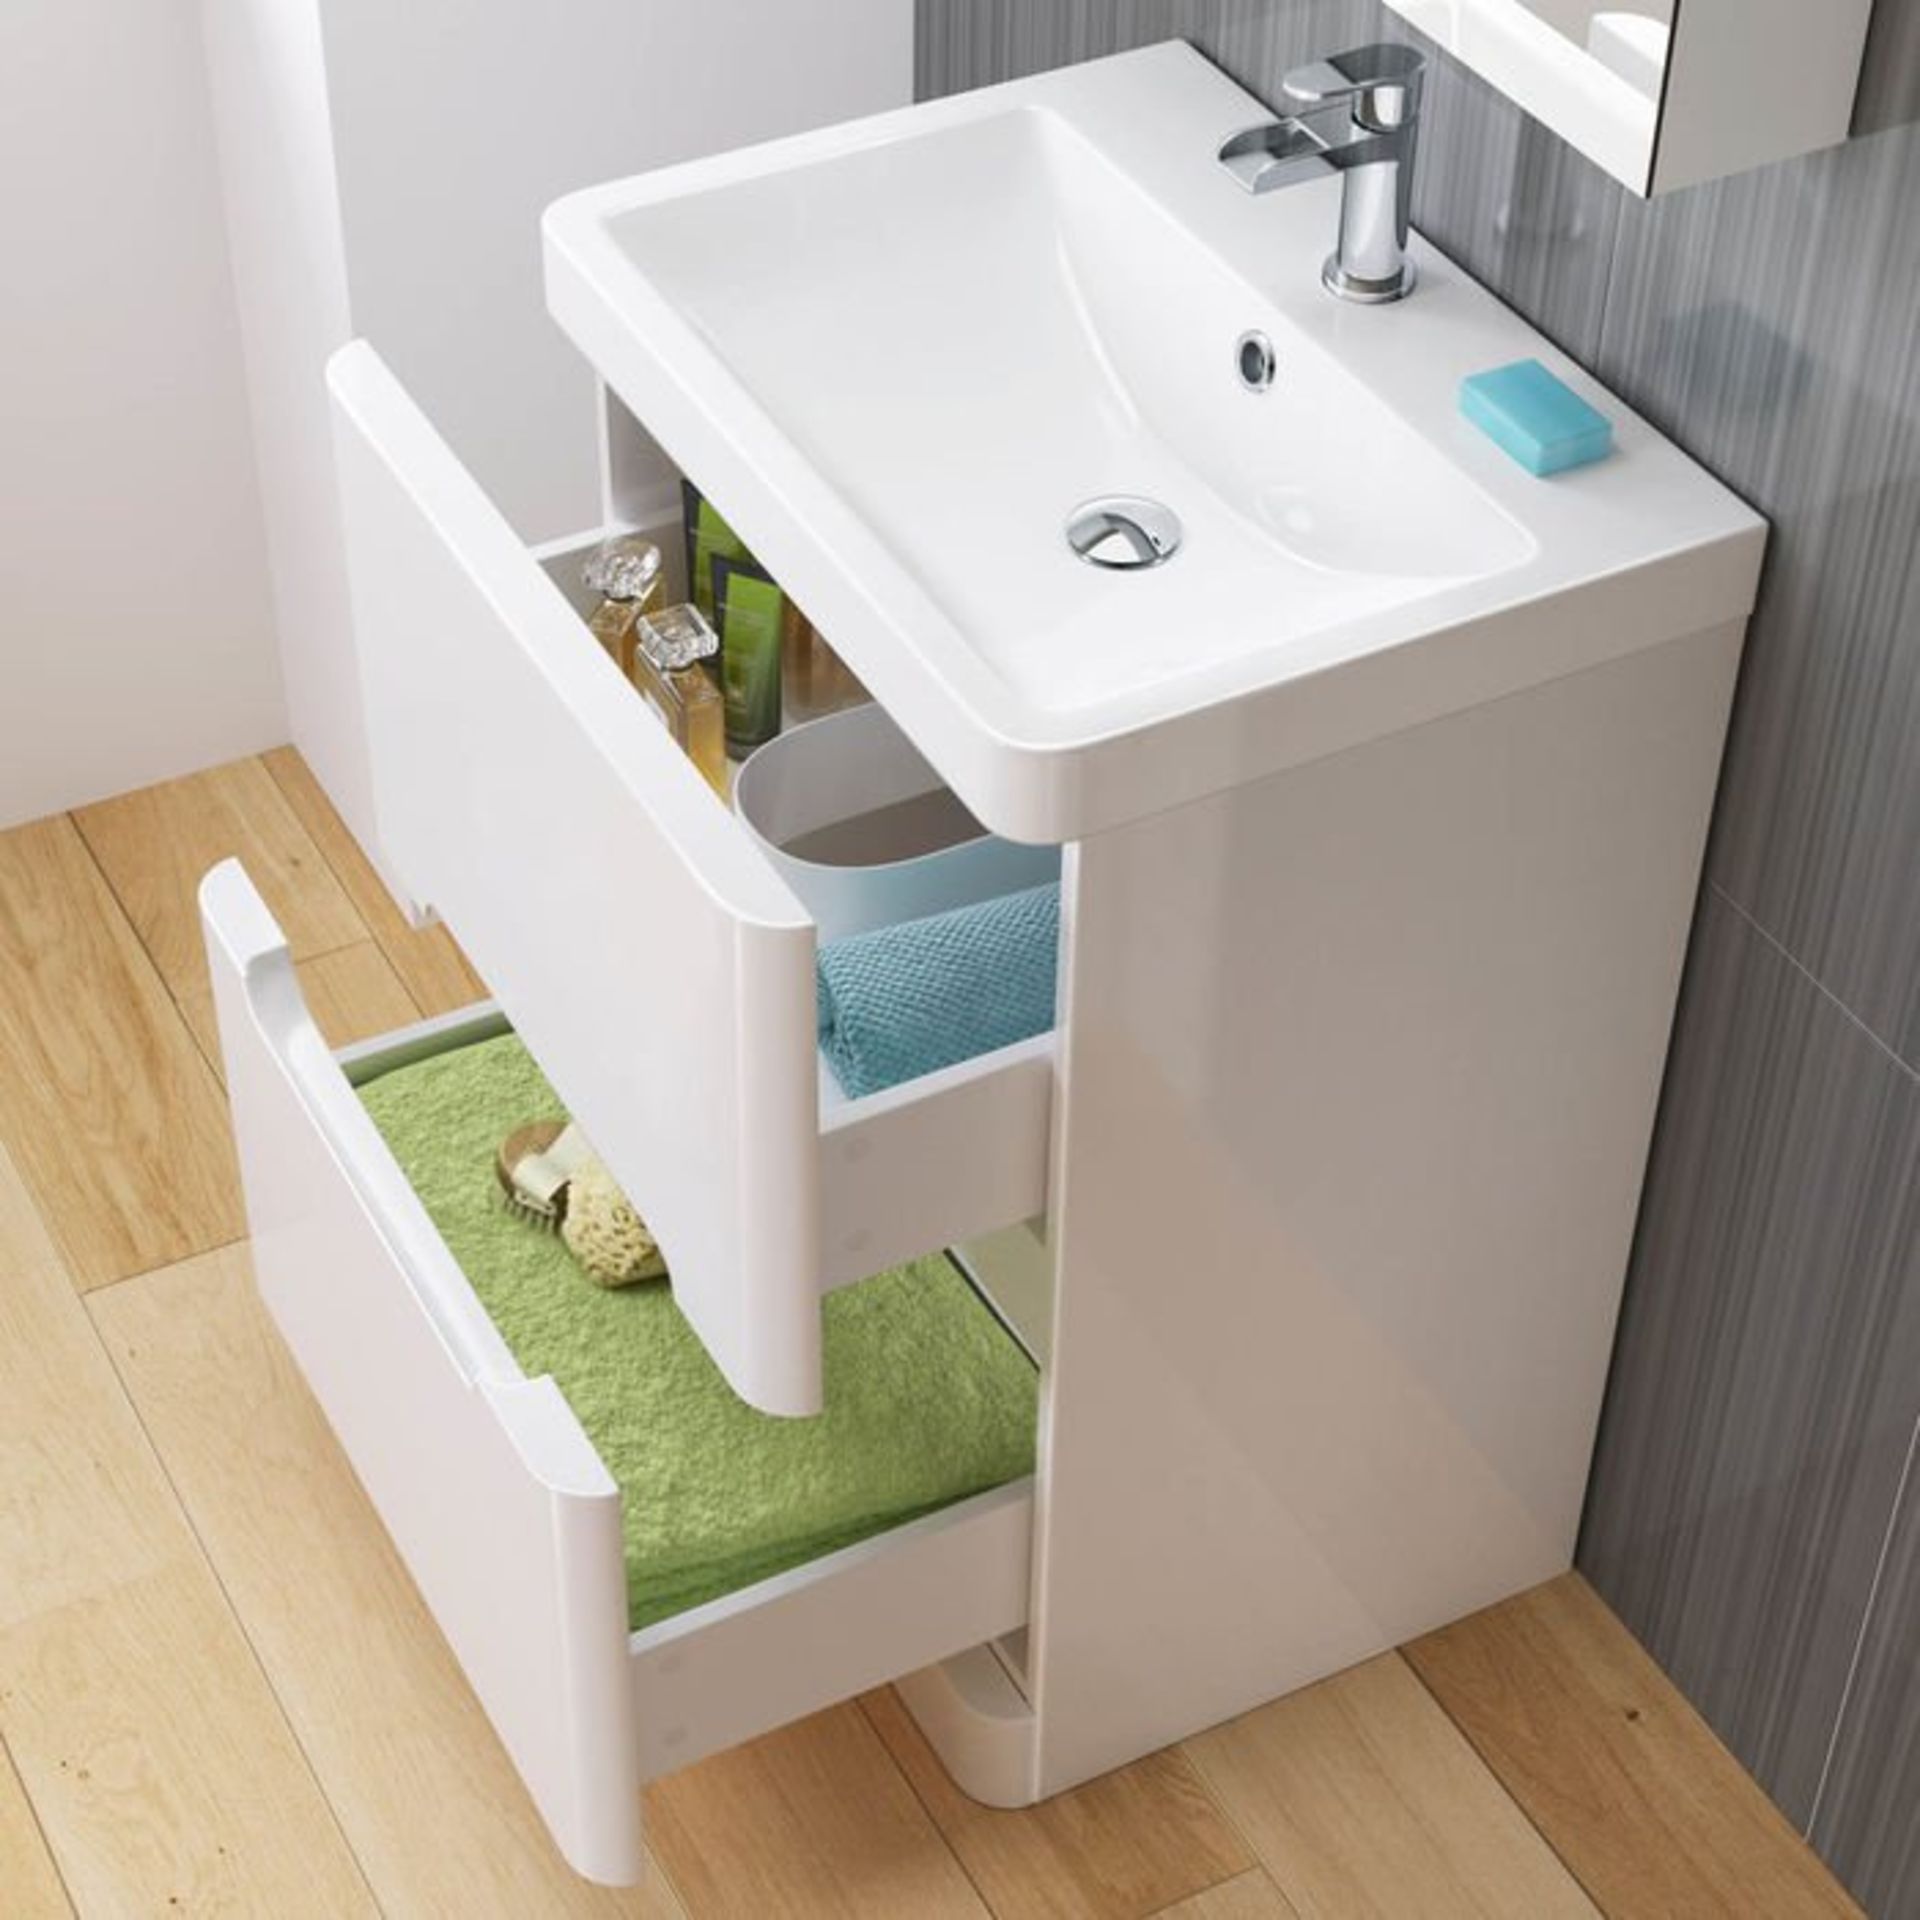 (G75) 600mm Tuscany Gloss White Built In Basin Double Drawer Unit - Floor Standing RRP £499.99. - Image 3 of 5